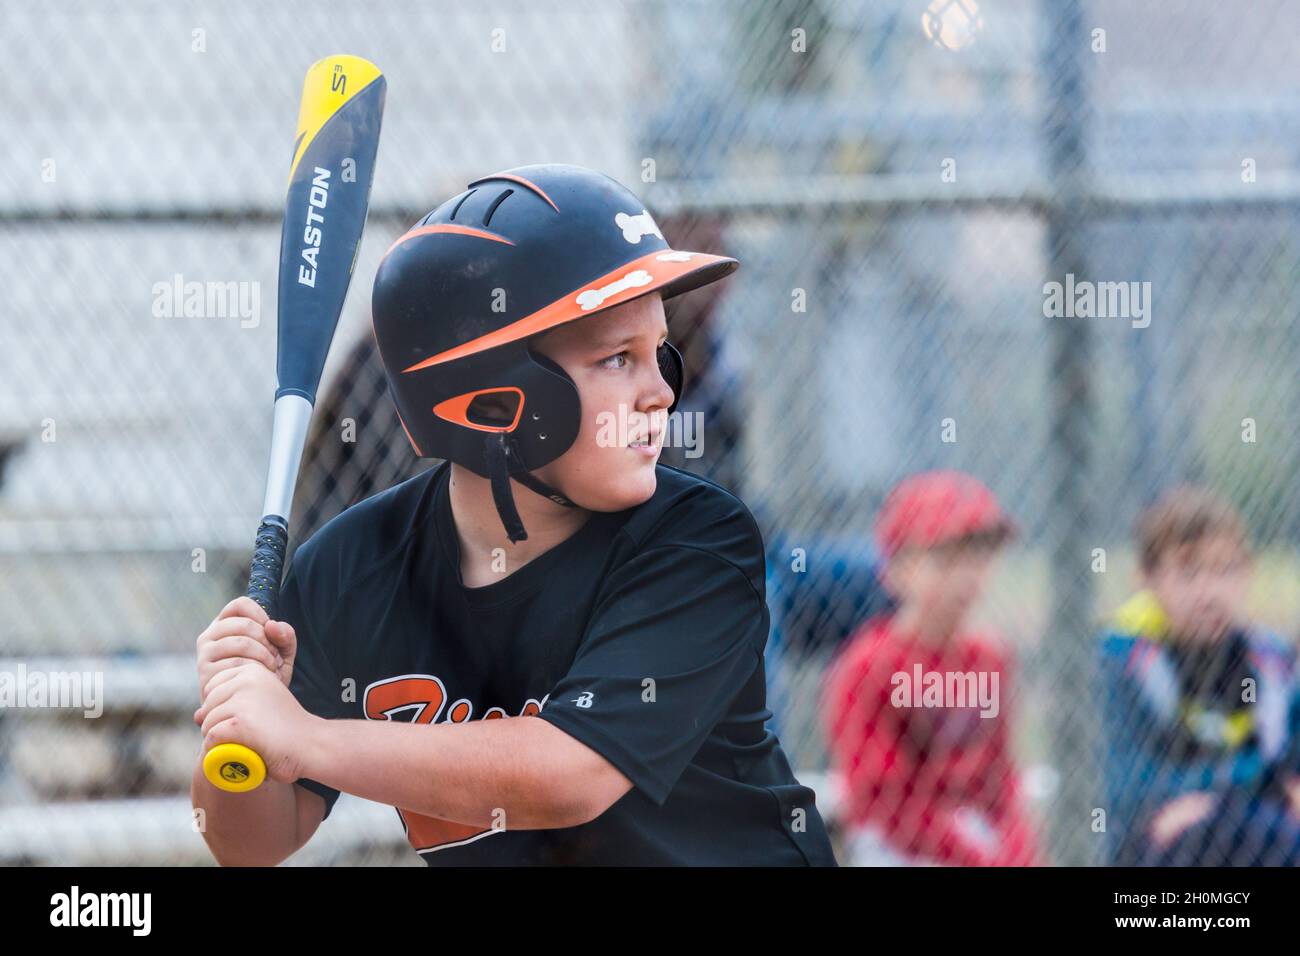 Young pre-teen male focusing on the pirched ball while playing baseball in uniform Stock Photo